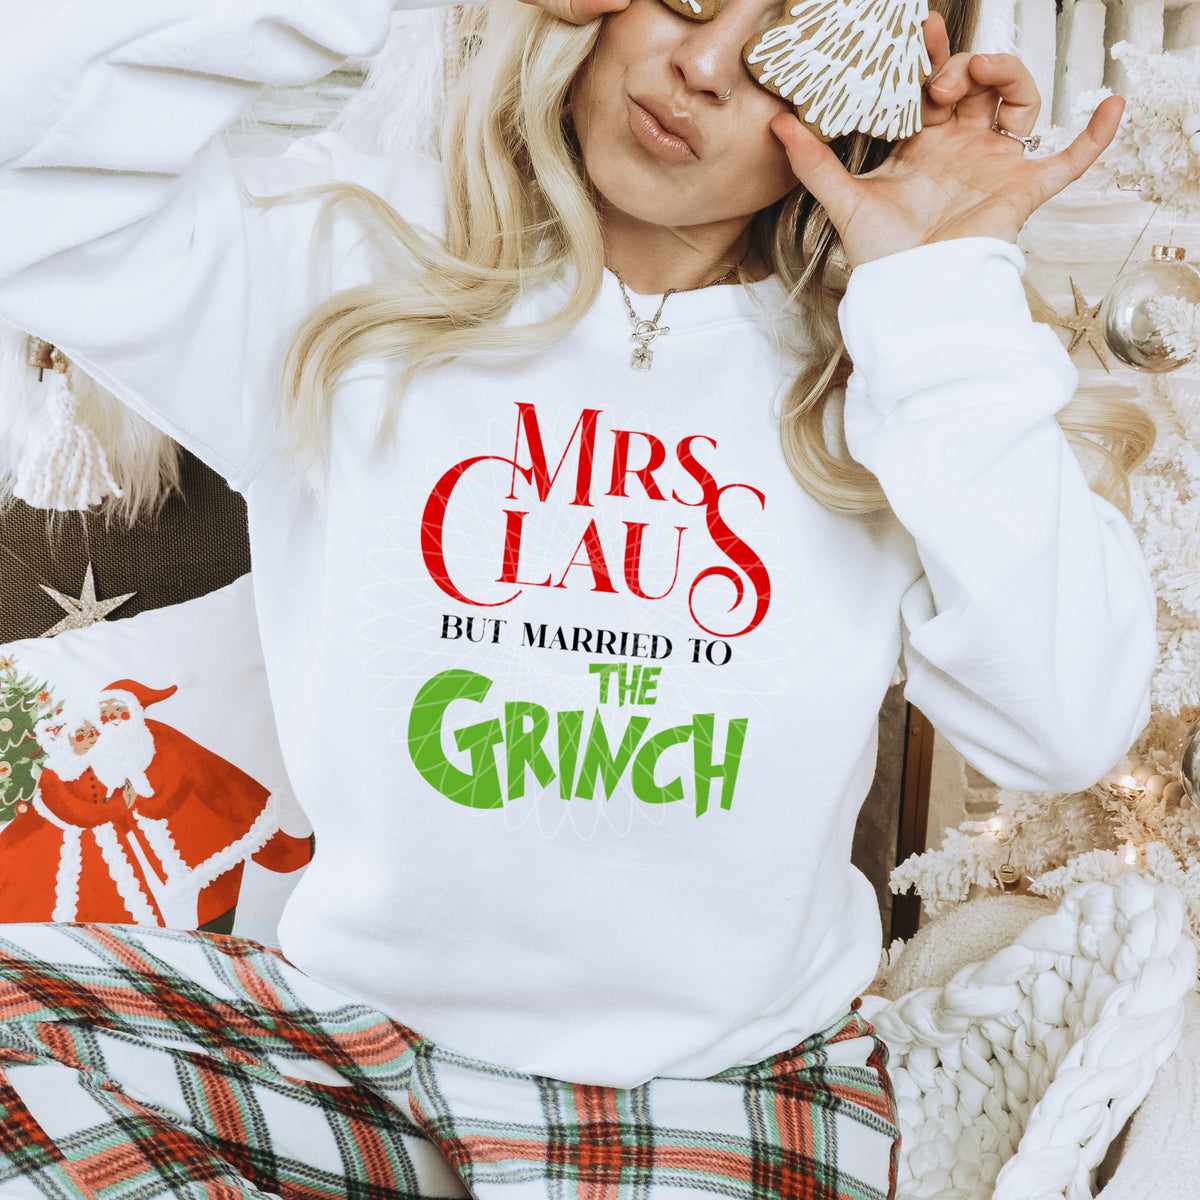 Mrs. Claus but married to the grinch